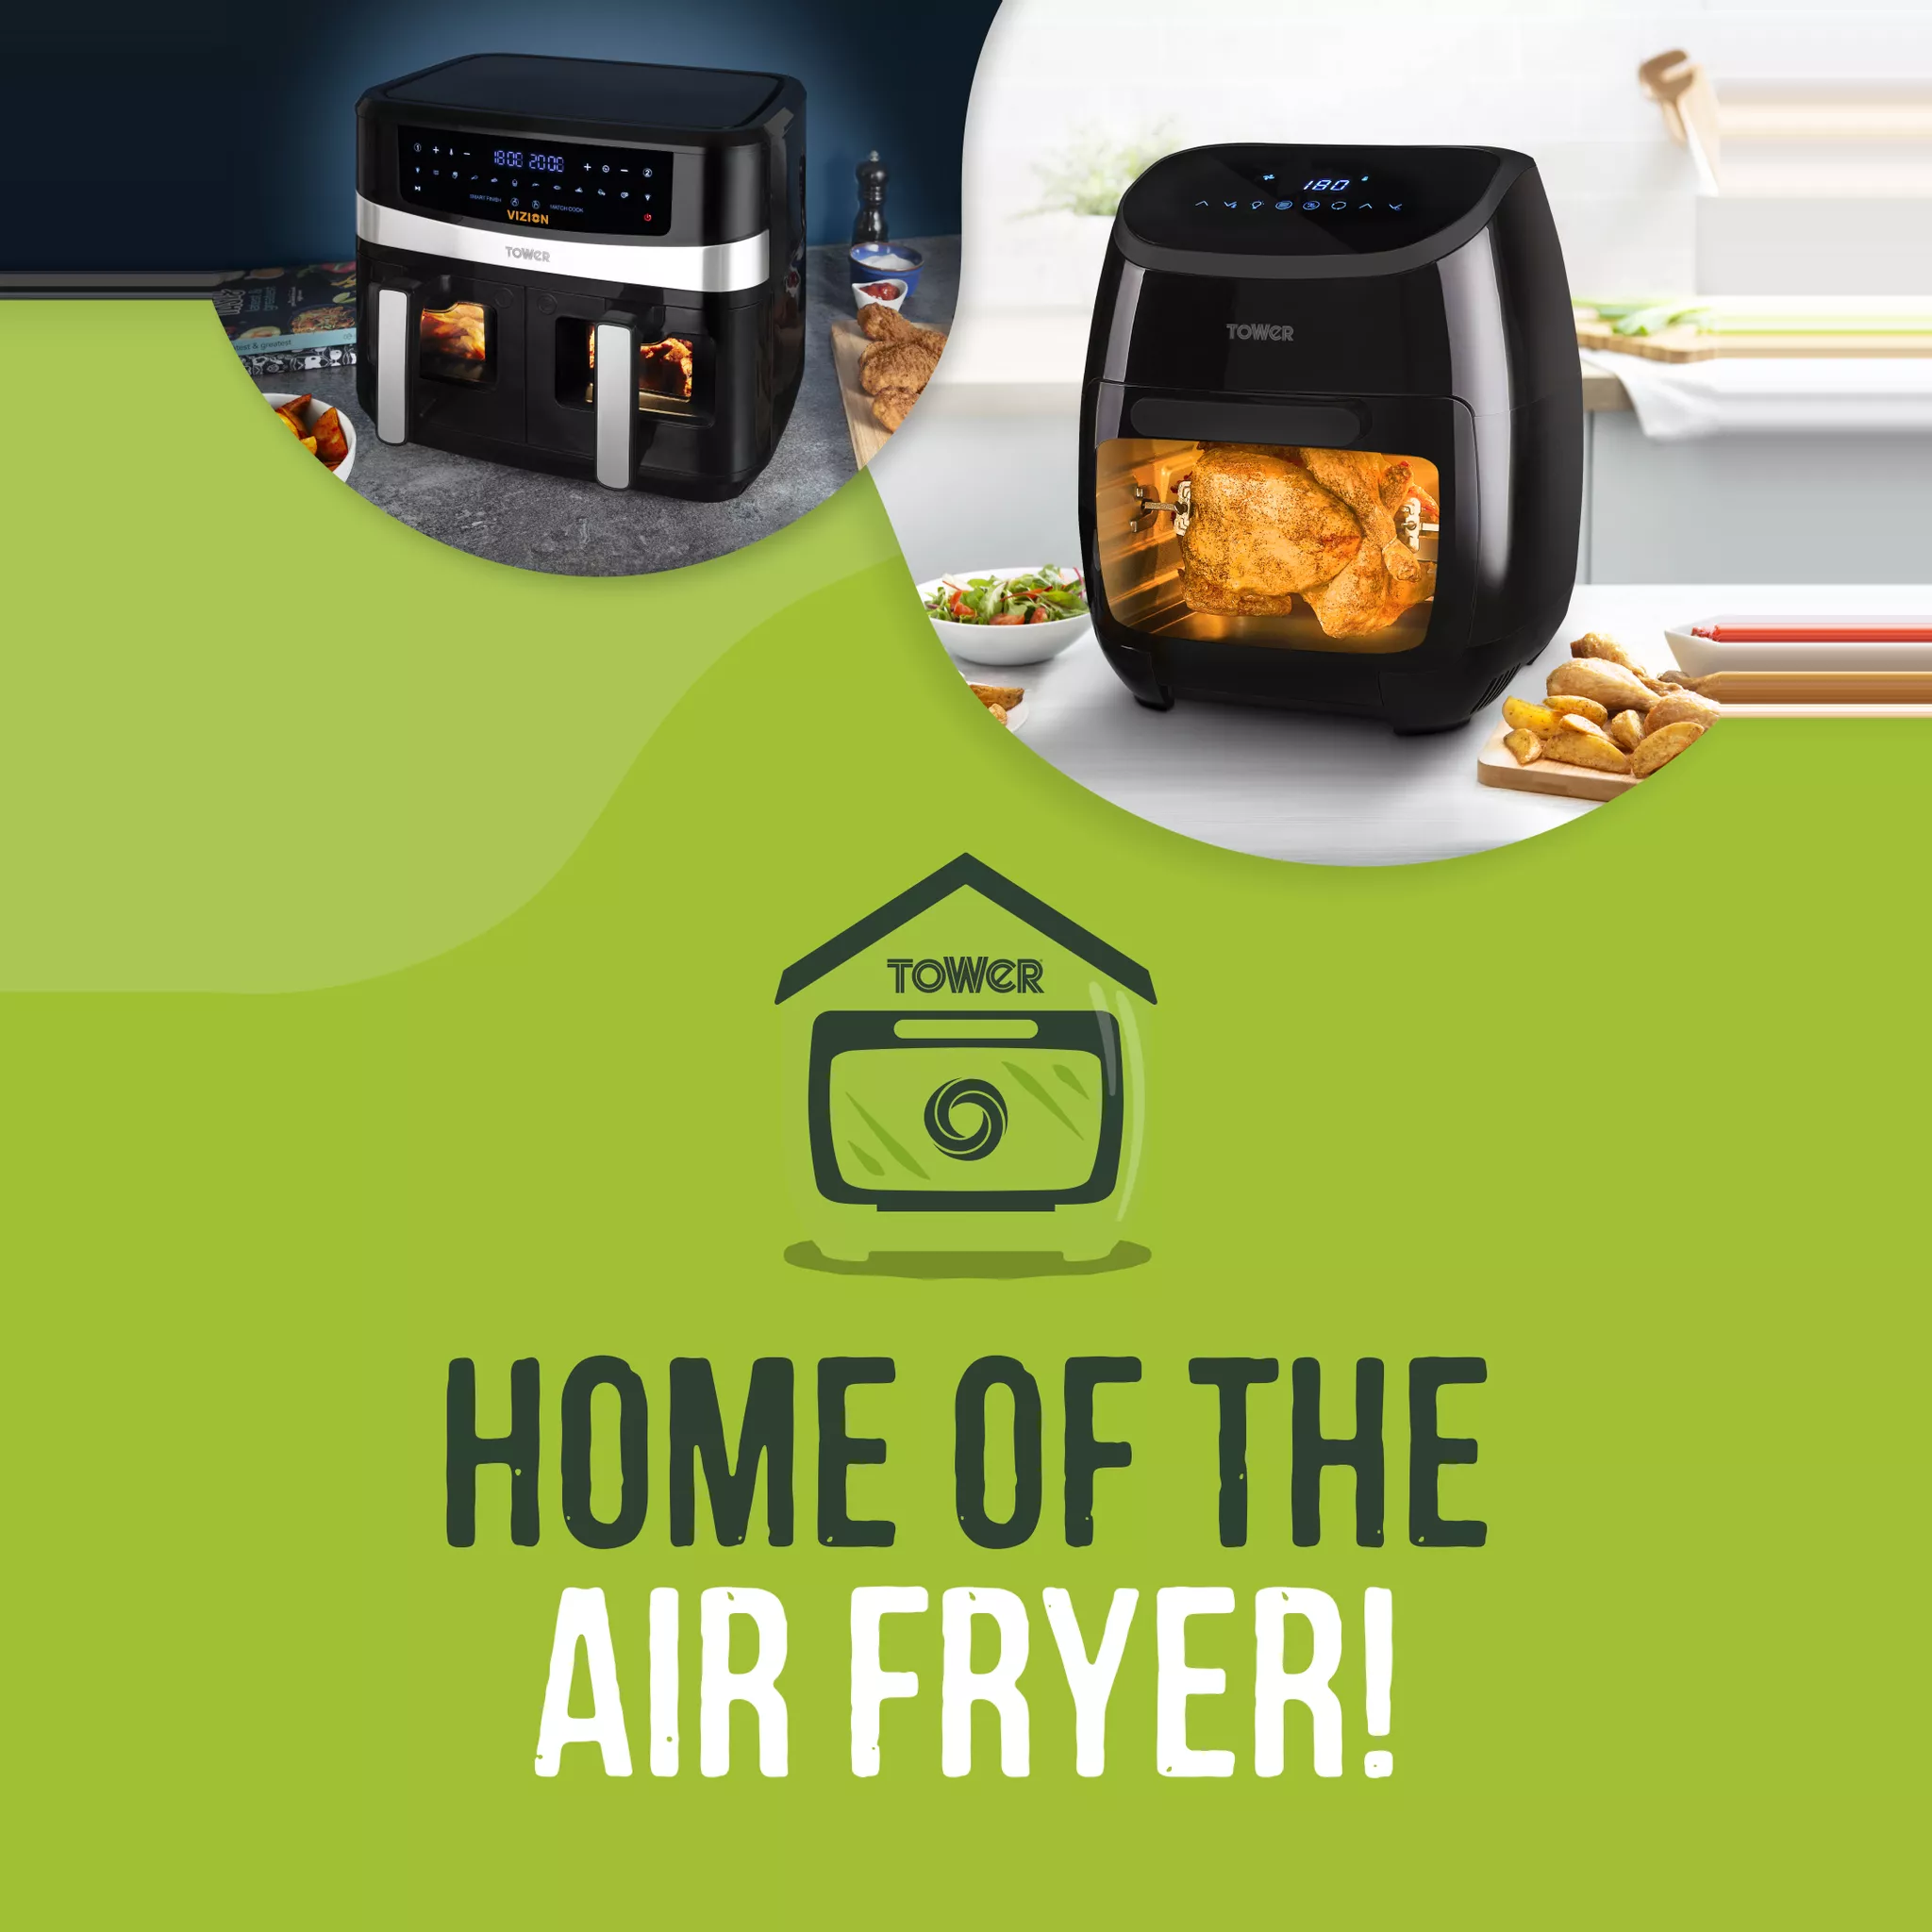 Just got my replacement : r/airfryer